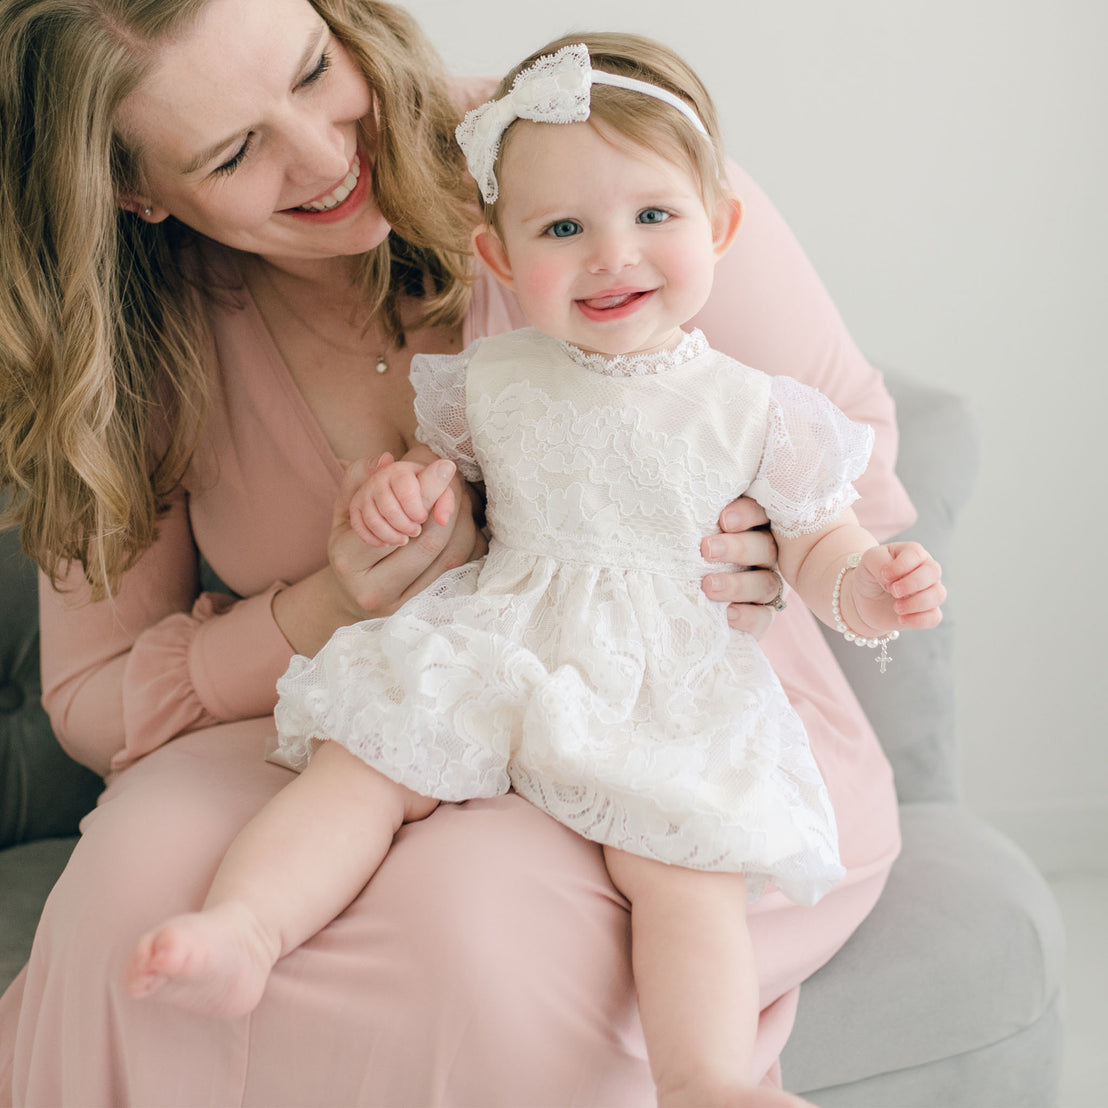 A woman in a pink dress smiles while holding her baby daughter, who is wearing the Aria Bubble Romper and an Aria Lace Bow Headband. They are seated on a grey chair in a softly lit room.